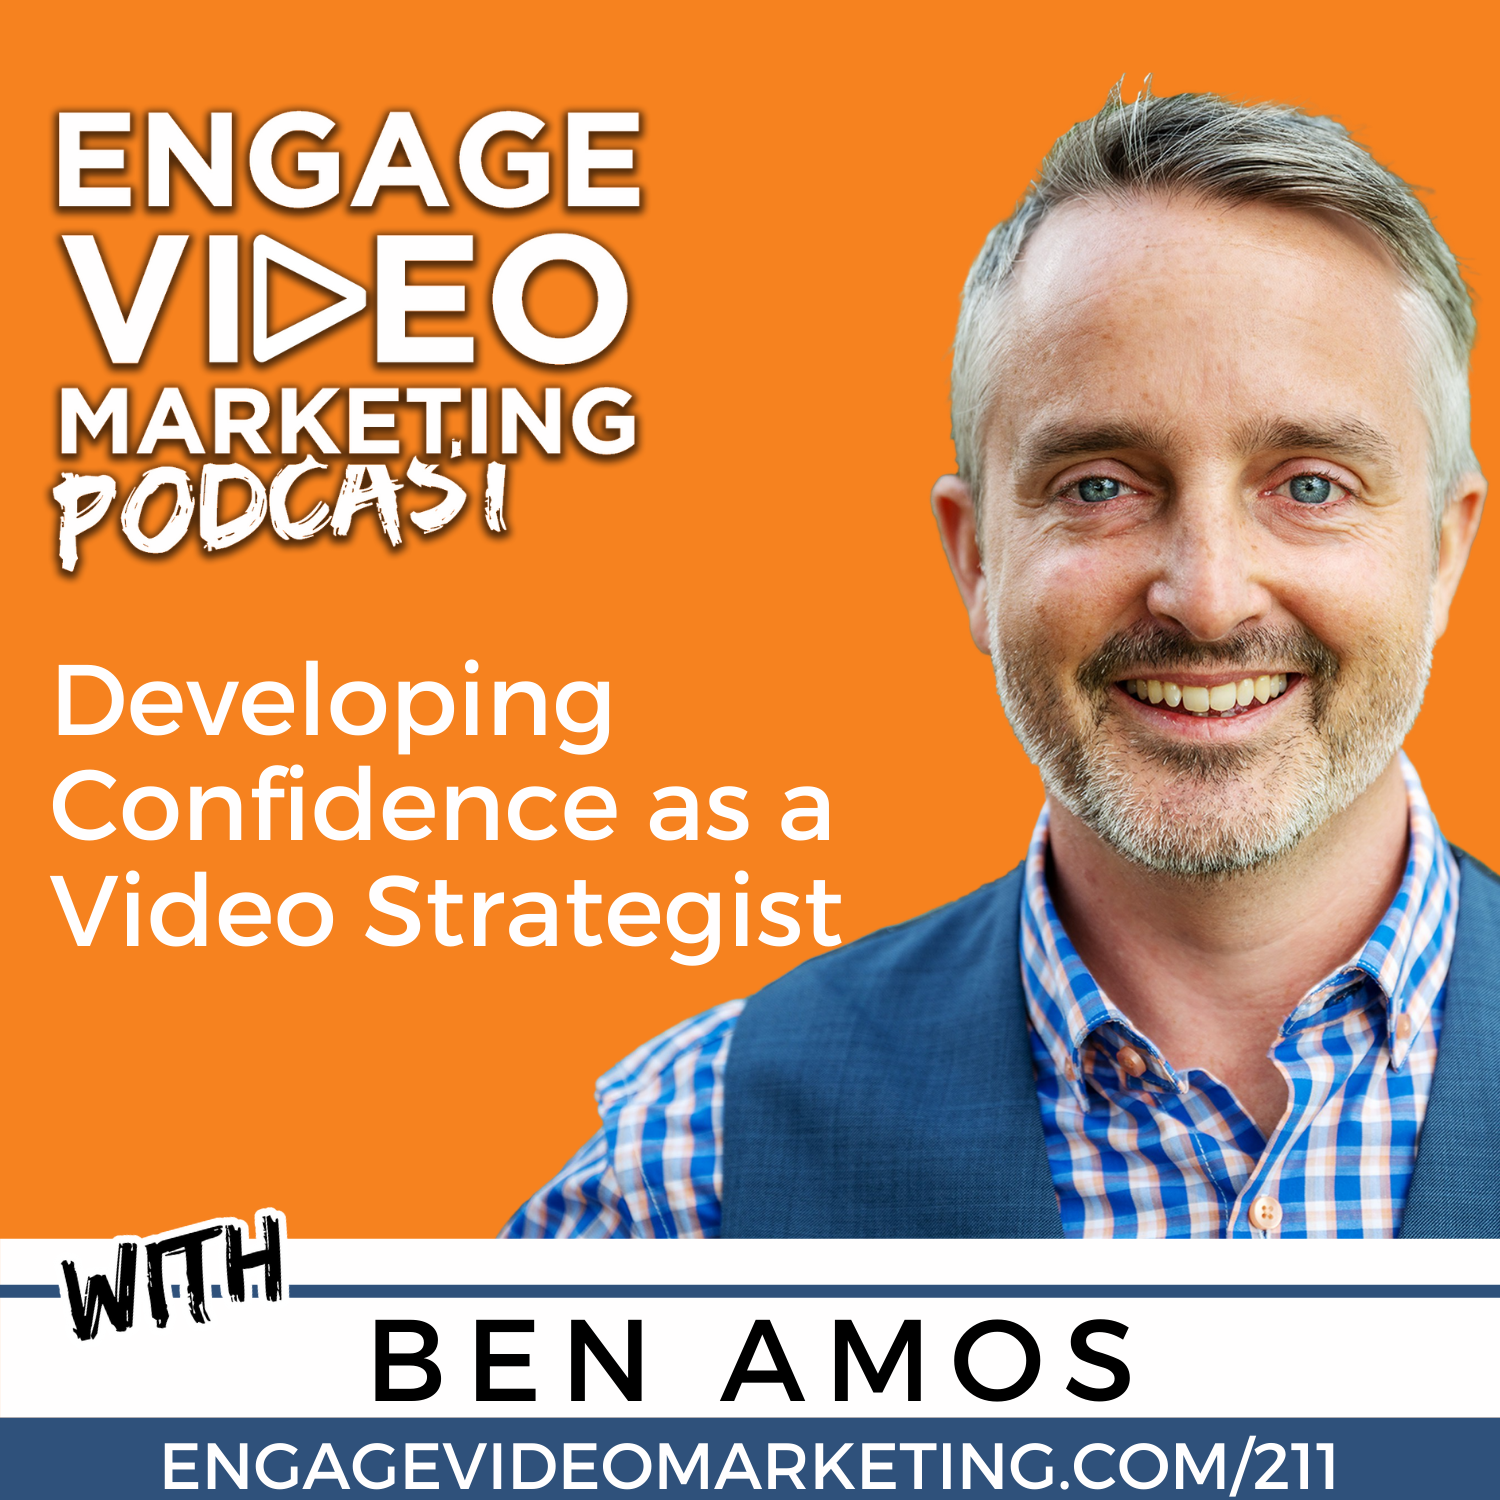 Developing Confidence as a Video Strategist